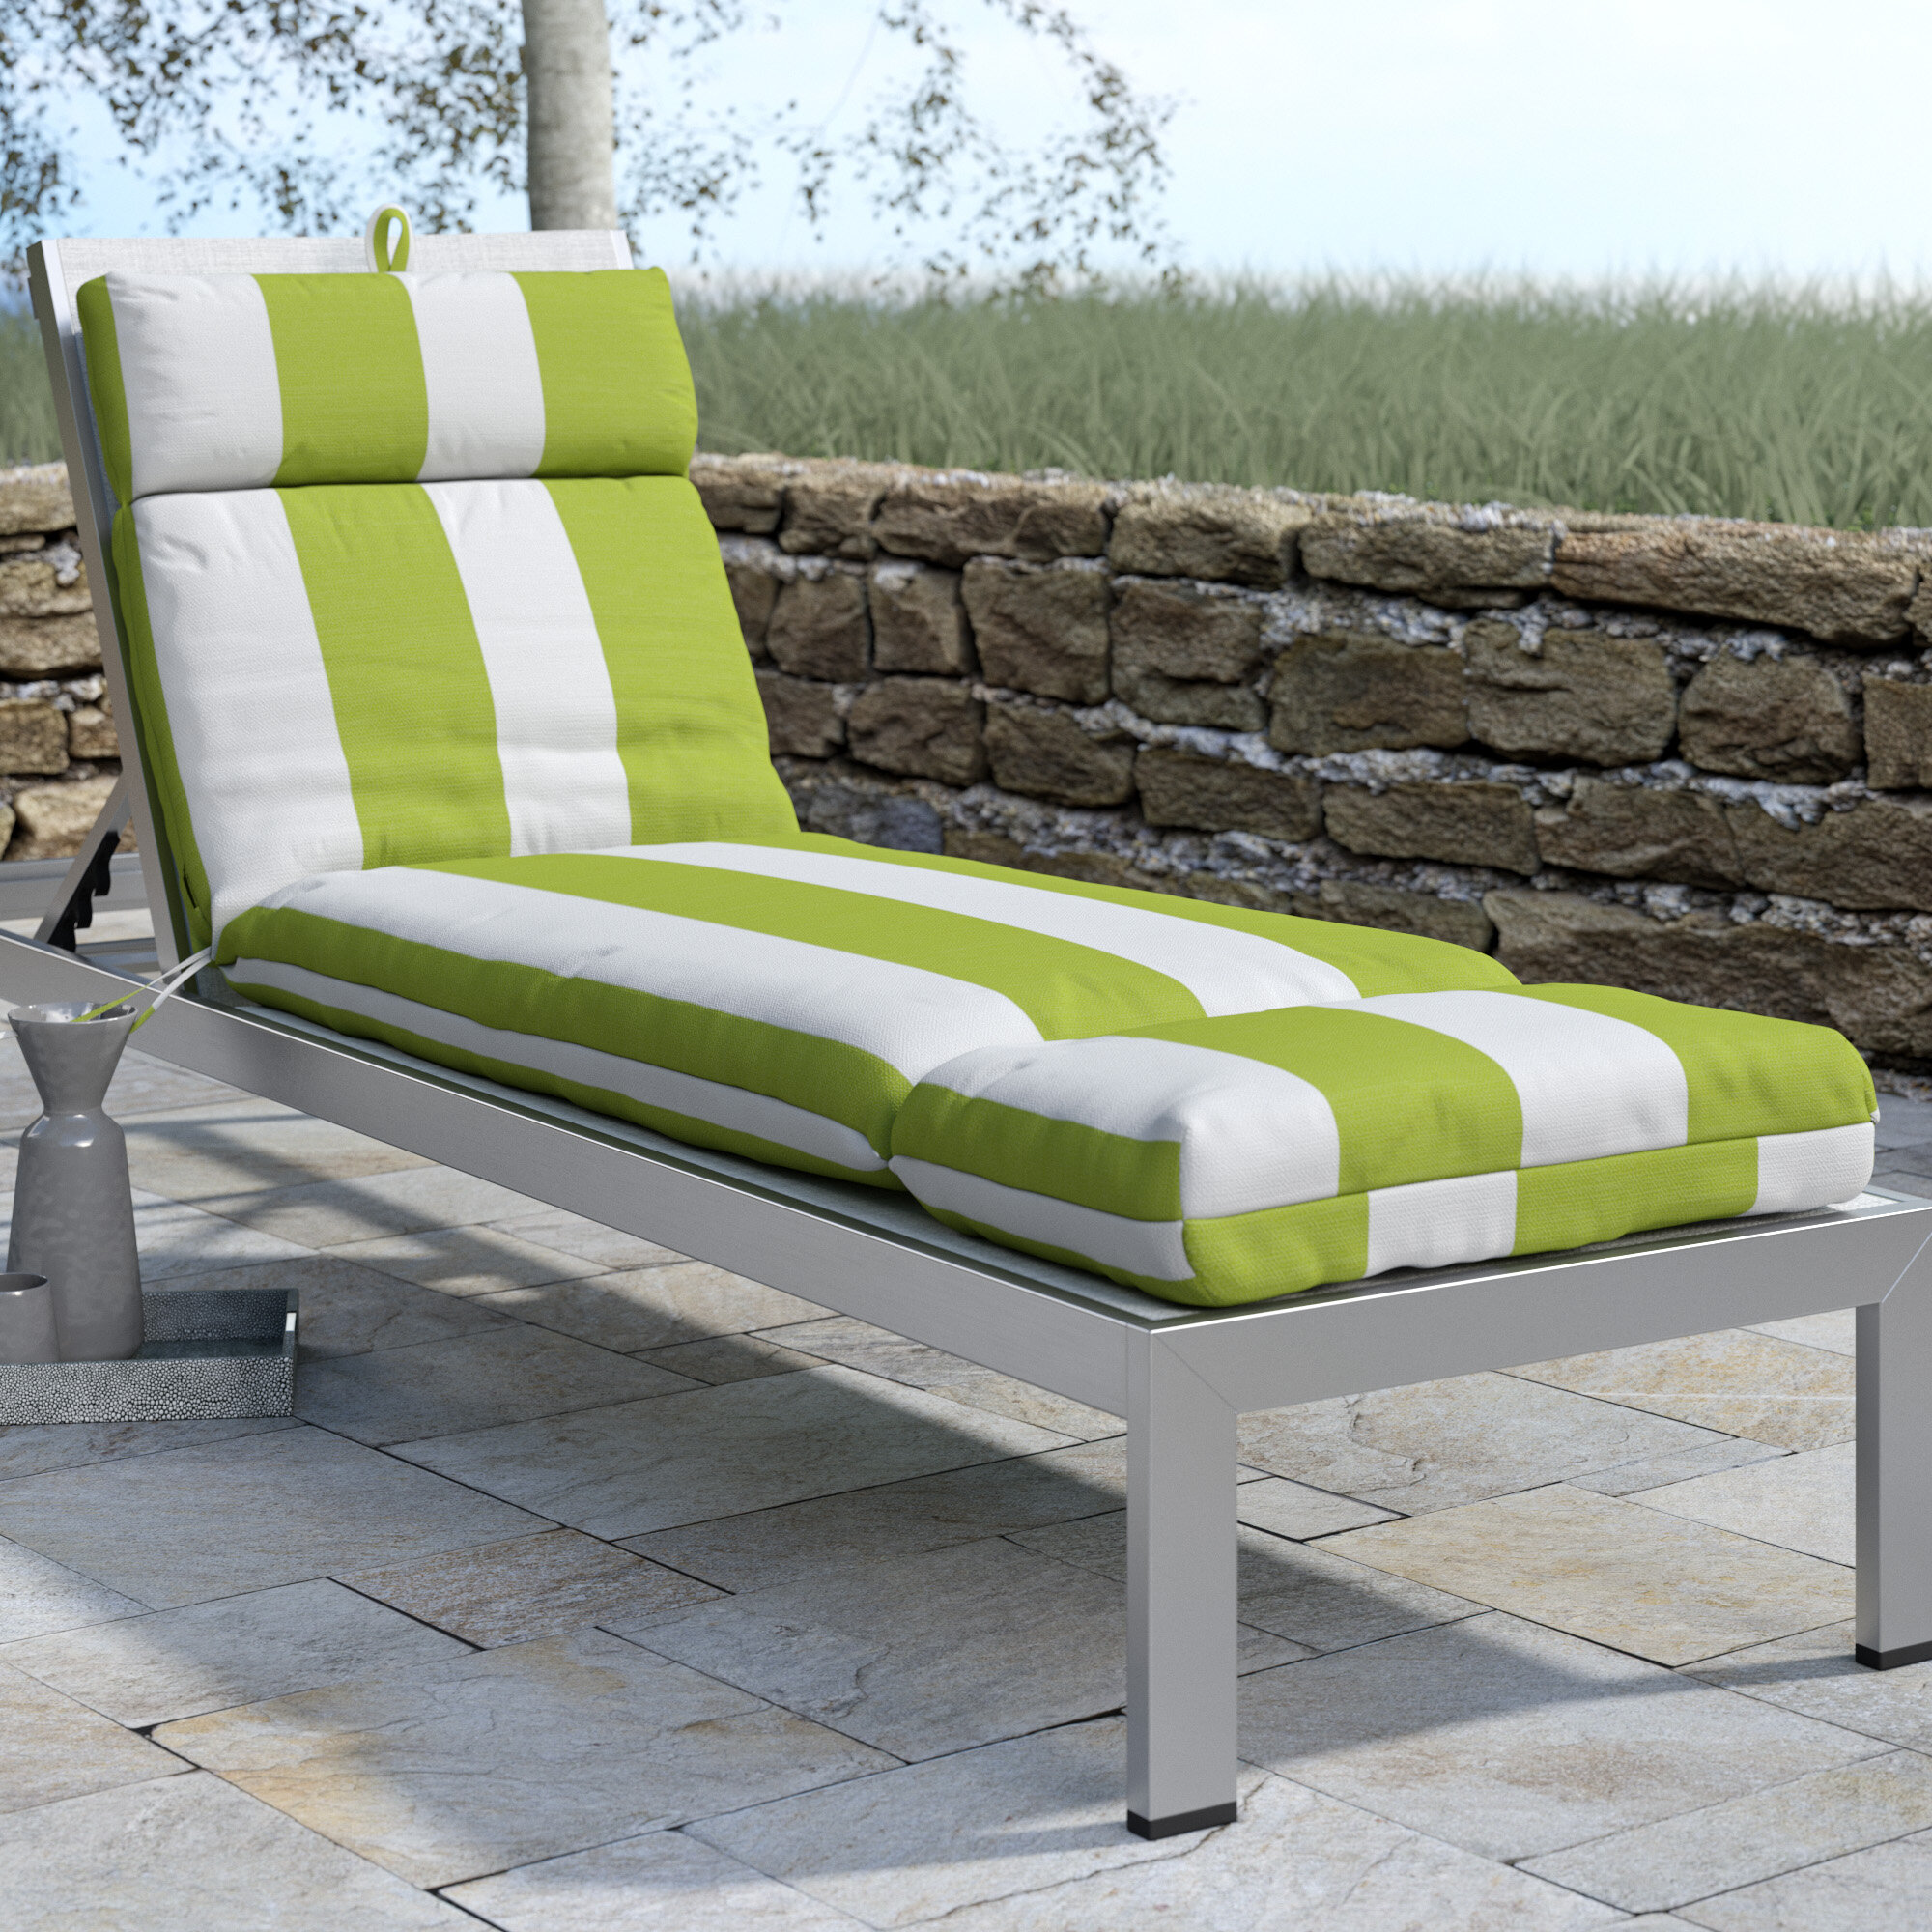 sale on outdoor chaise lounge cushions